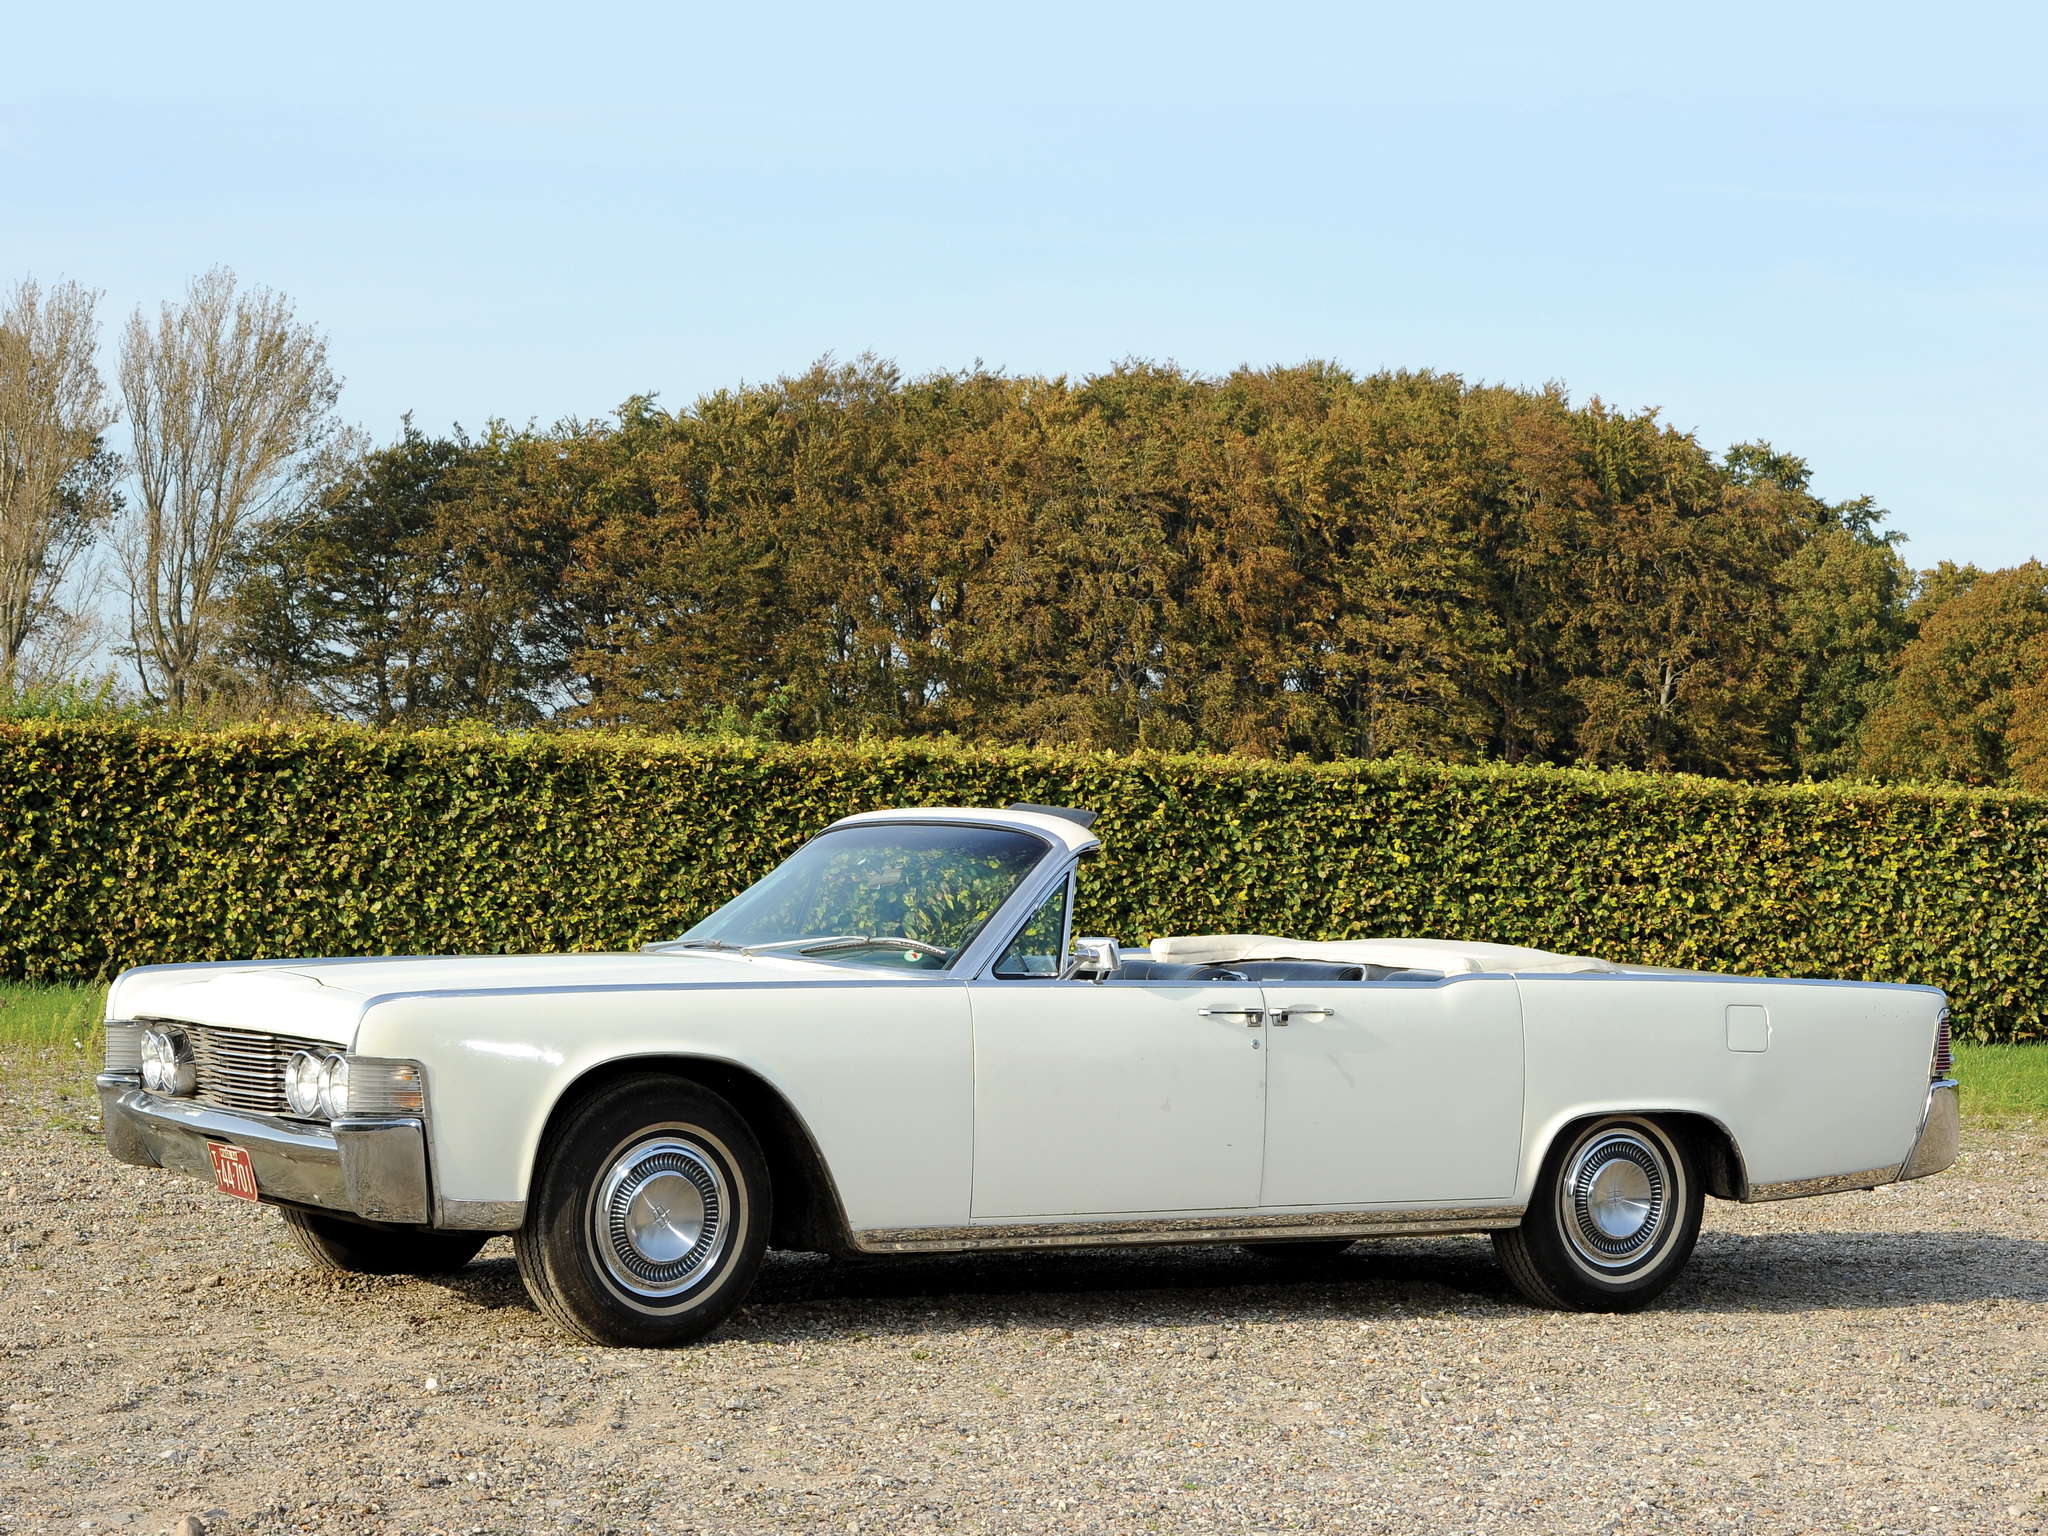 1965, Lincoln, Continental, Convertible, Classic, Luxury Wallpaper